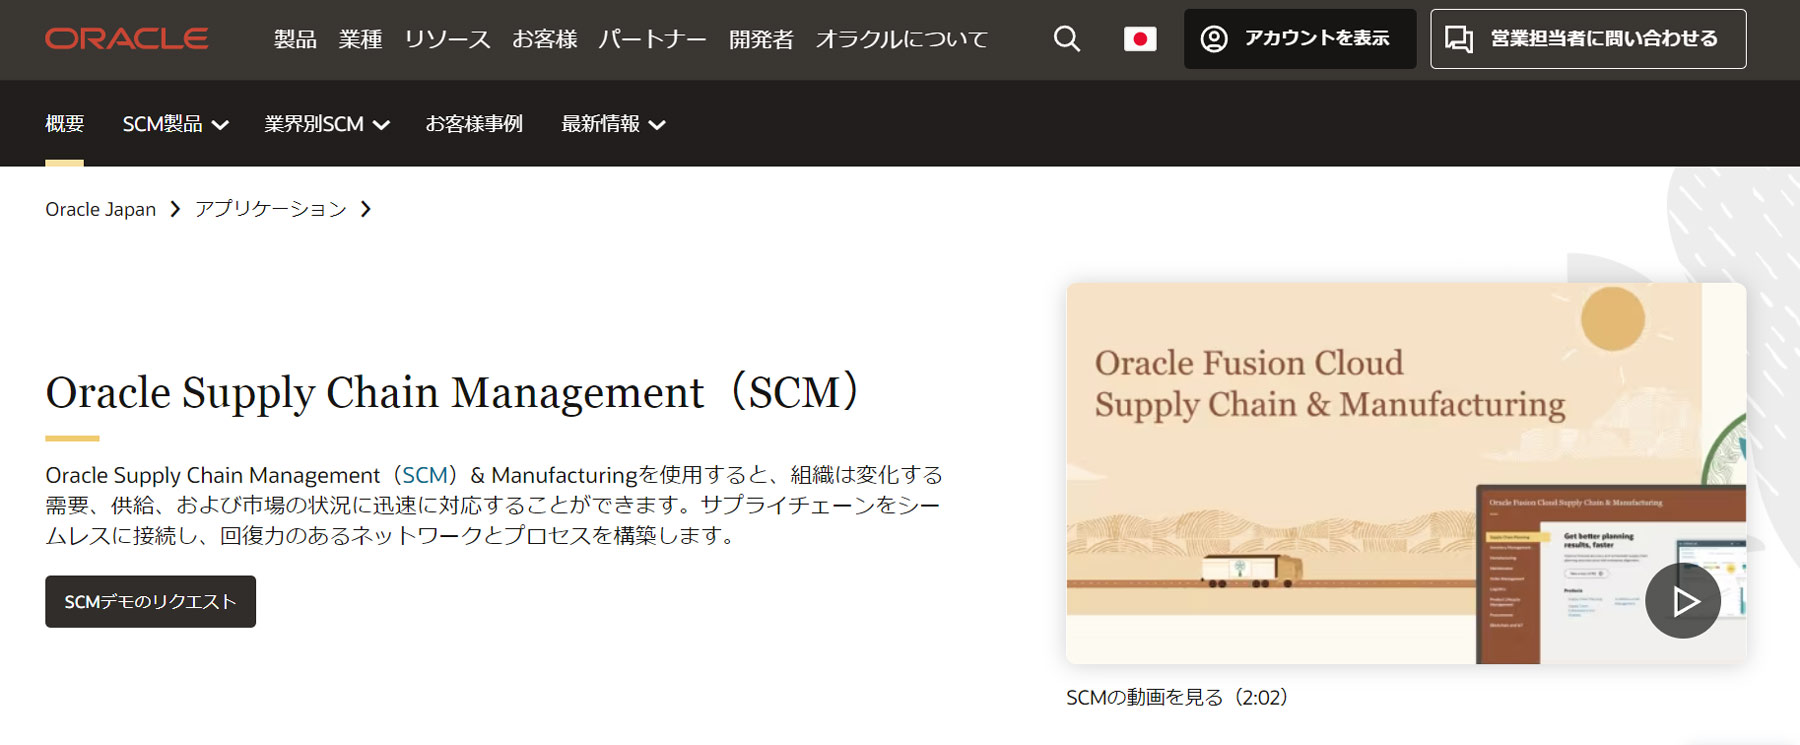 Oracle Supply Chain Management公式Webサイト